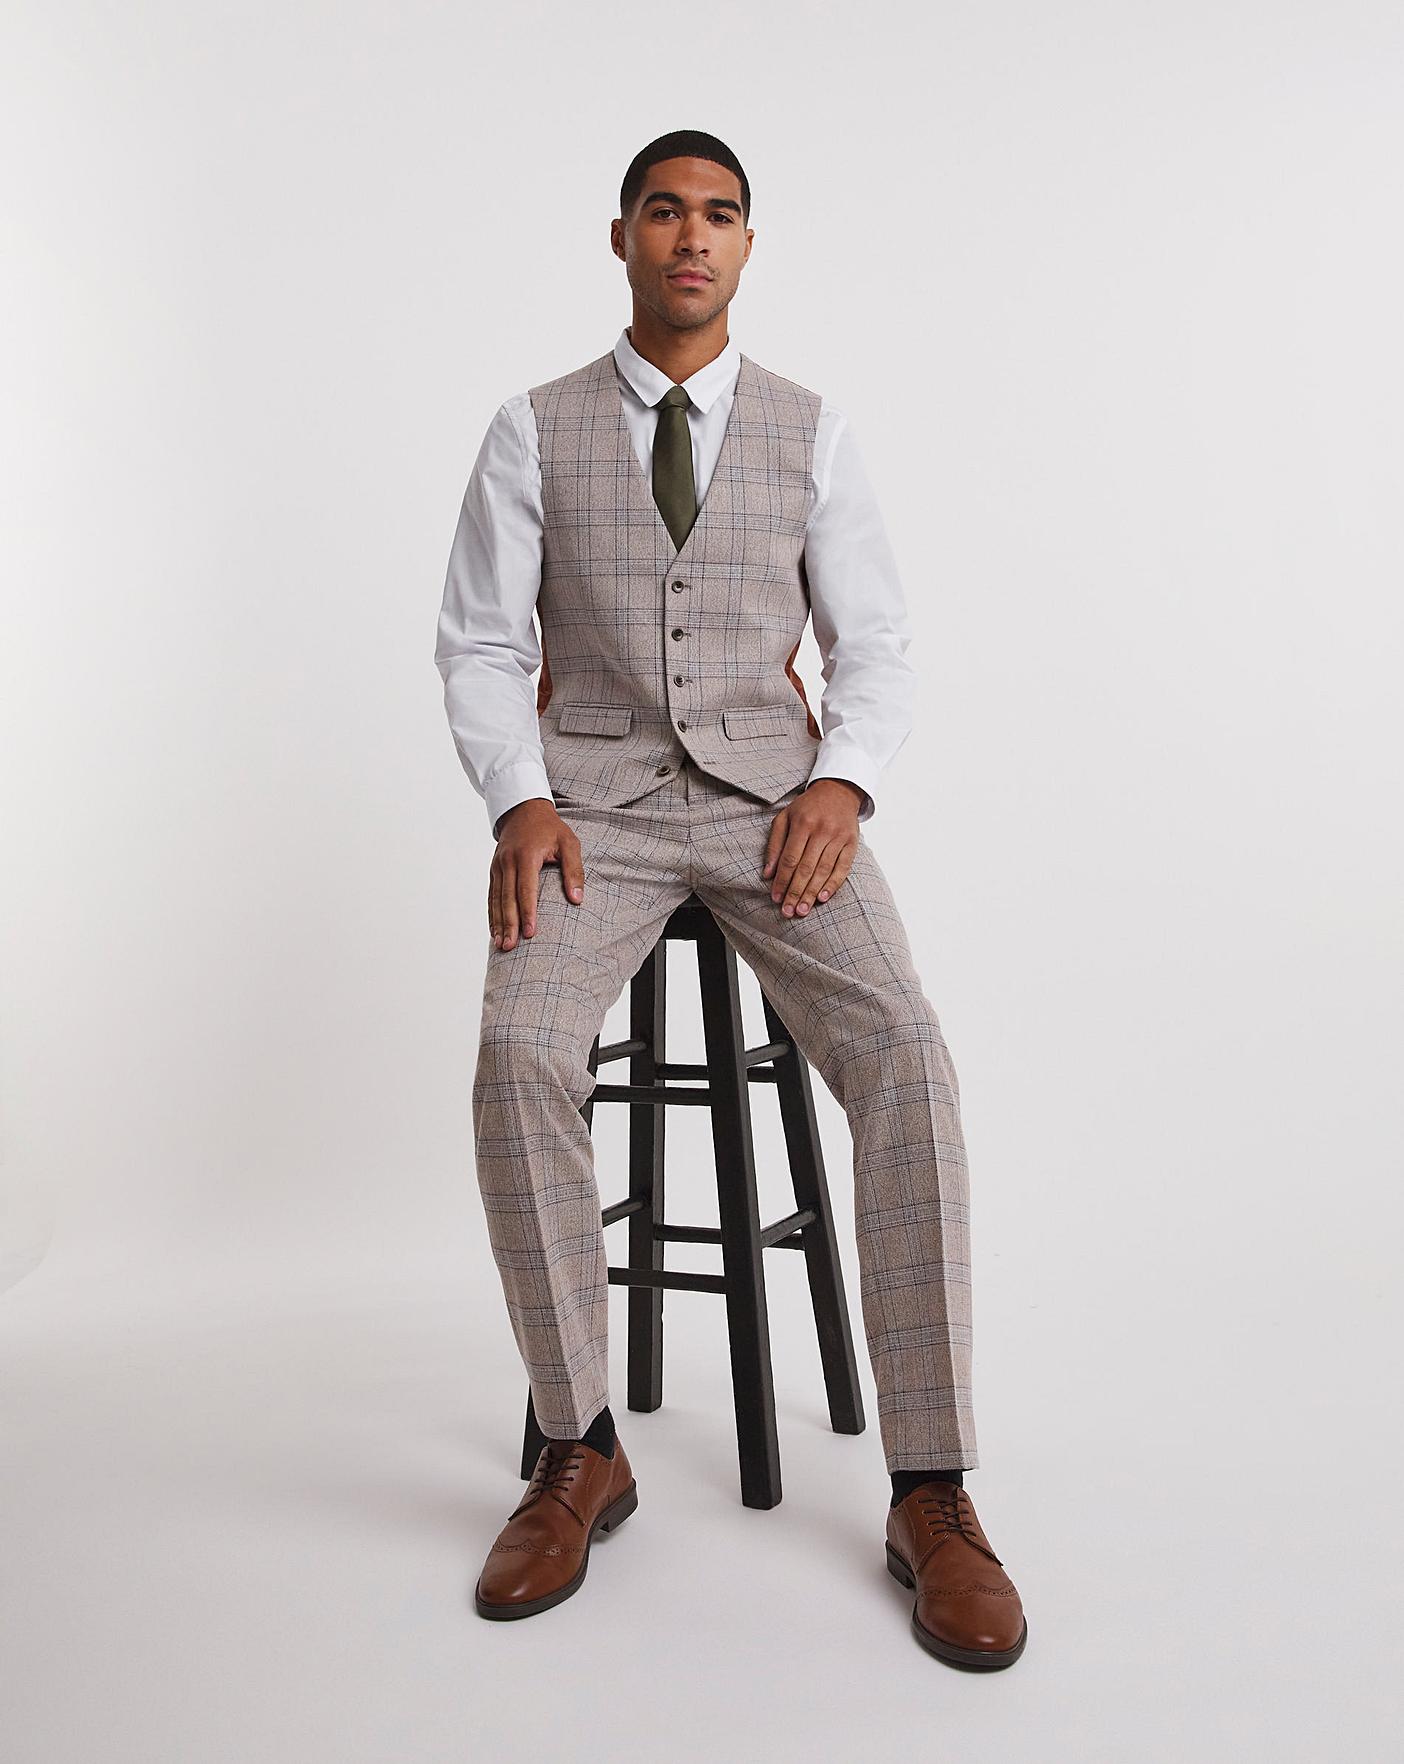 Navy Pic Slim/Tailored Fit Suit - Haig-Harrison's Men's Hire and Tailoring